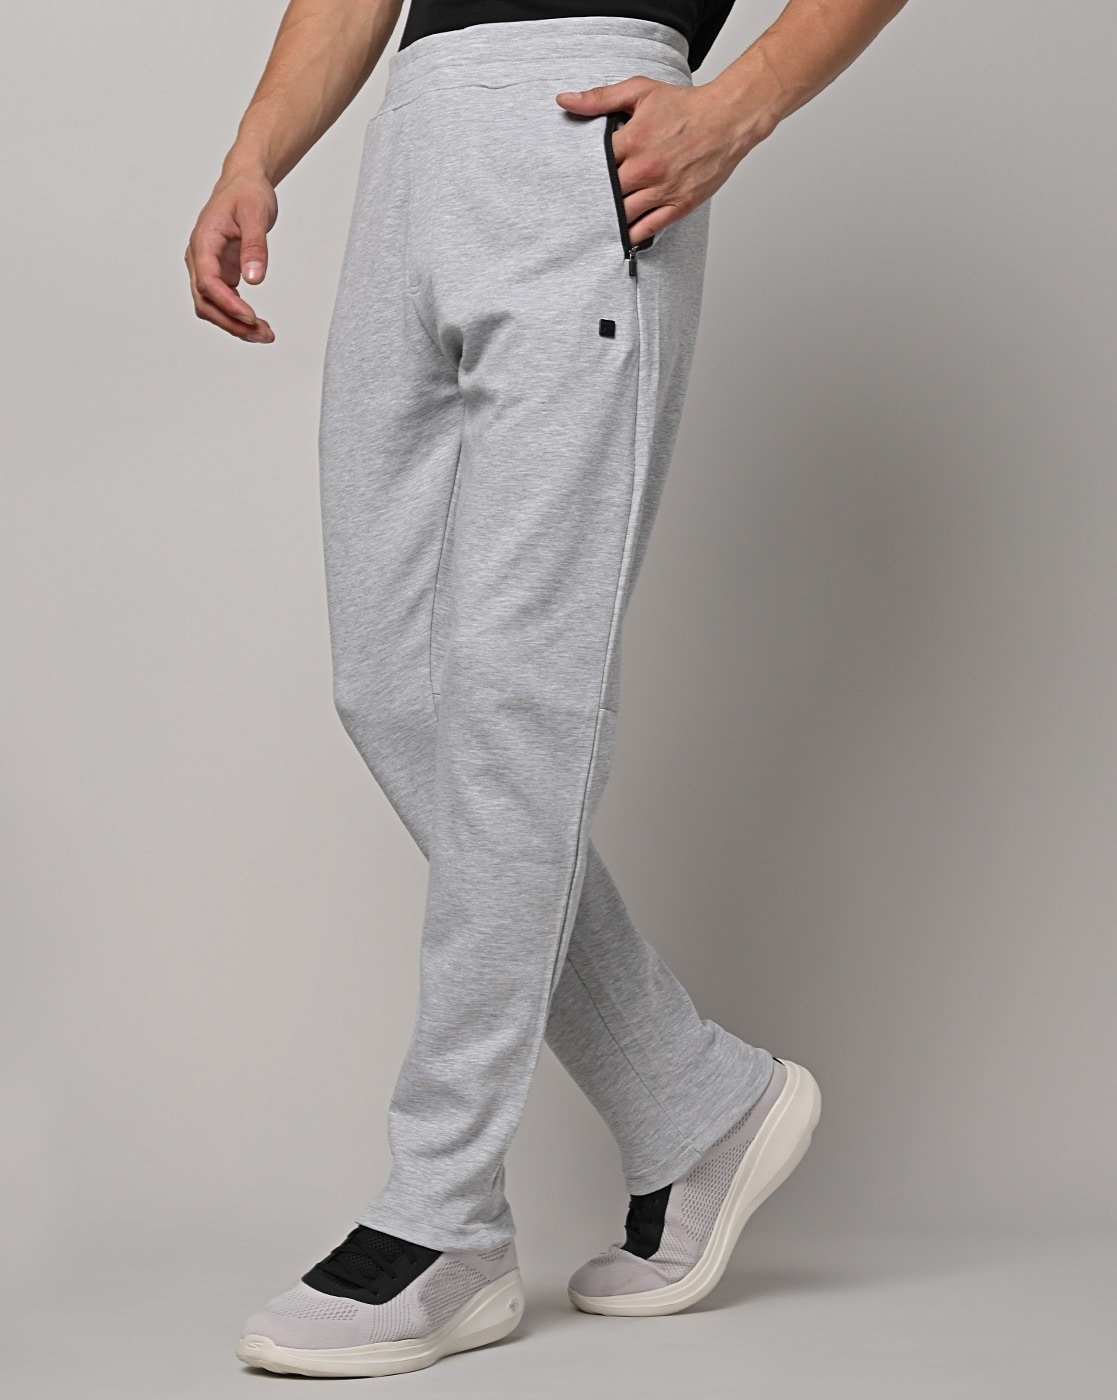 Men's Sports Track Pants | Men's Athletic Joggers for Running, Yoga, Gym  and Workout Size 2XL Grey : Amazon.in: Clothing & Accessories